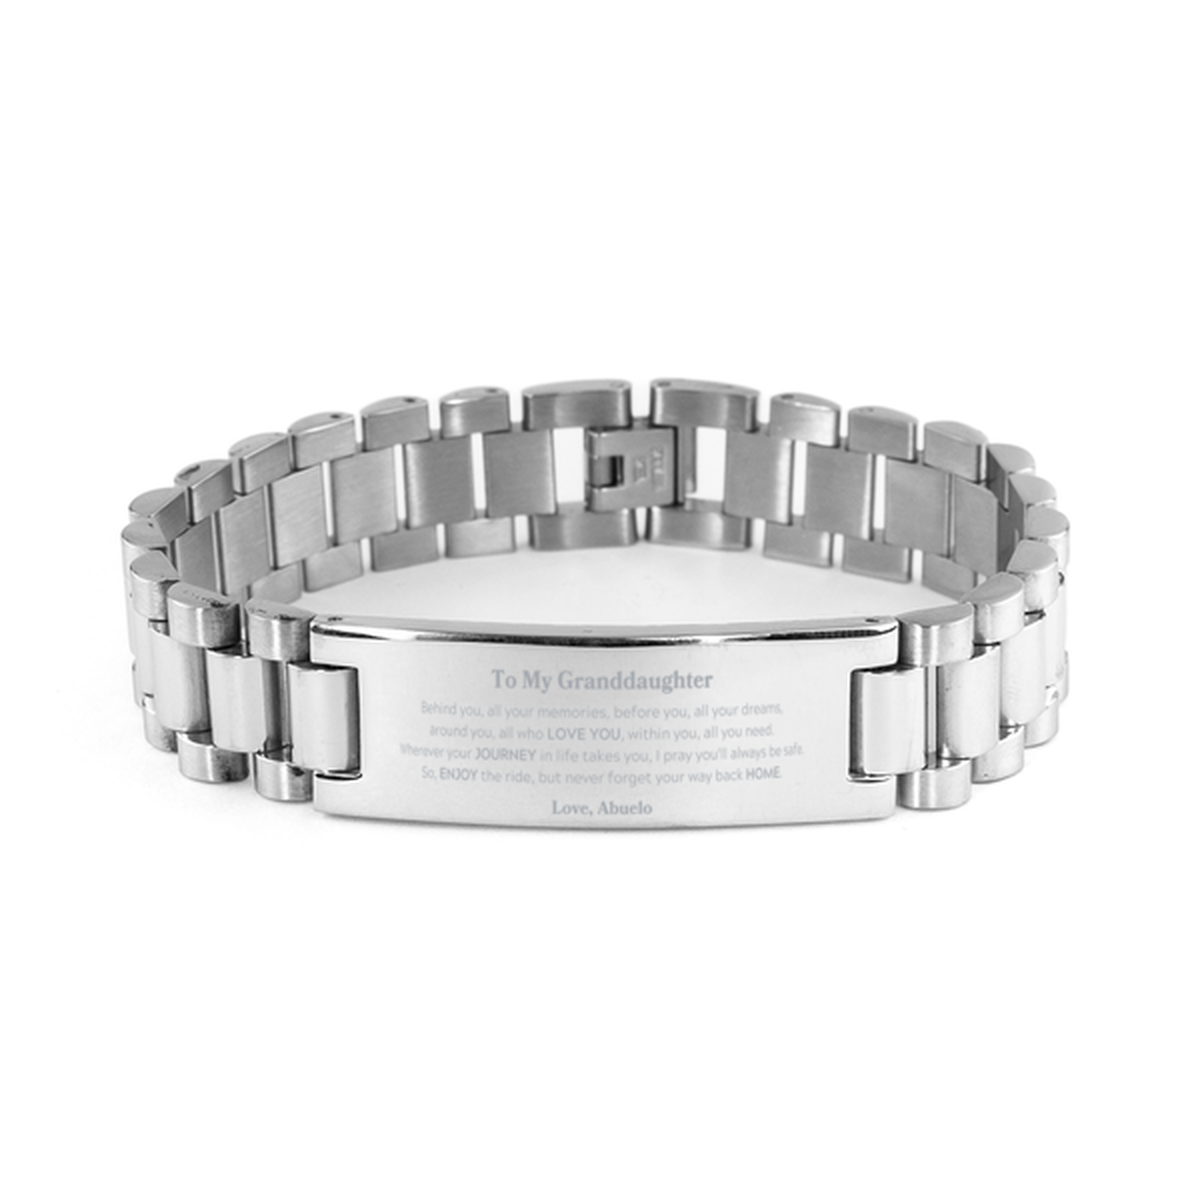 To My Granddaughter Graduation Gifts from Abuelo, Granddaughter Ladder Stainless Steel Bracelet Christmas Birthday Gifts for Granddaughter Behind you, all your memories, before you, all your dreams. Love, Abuelo